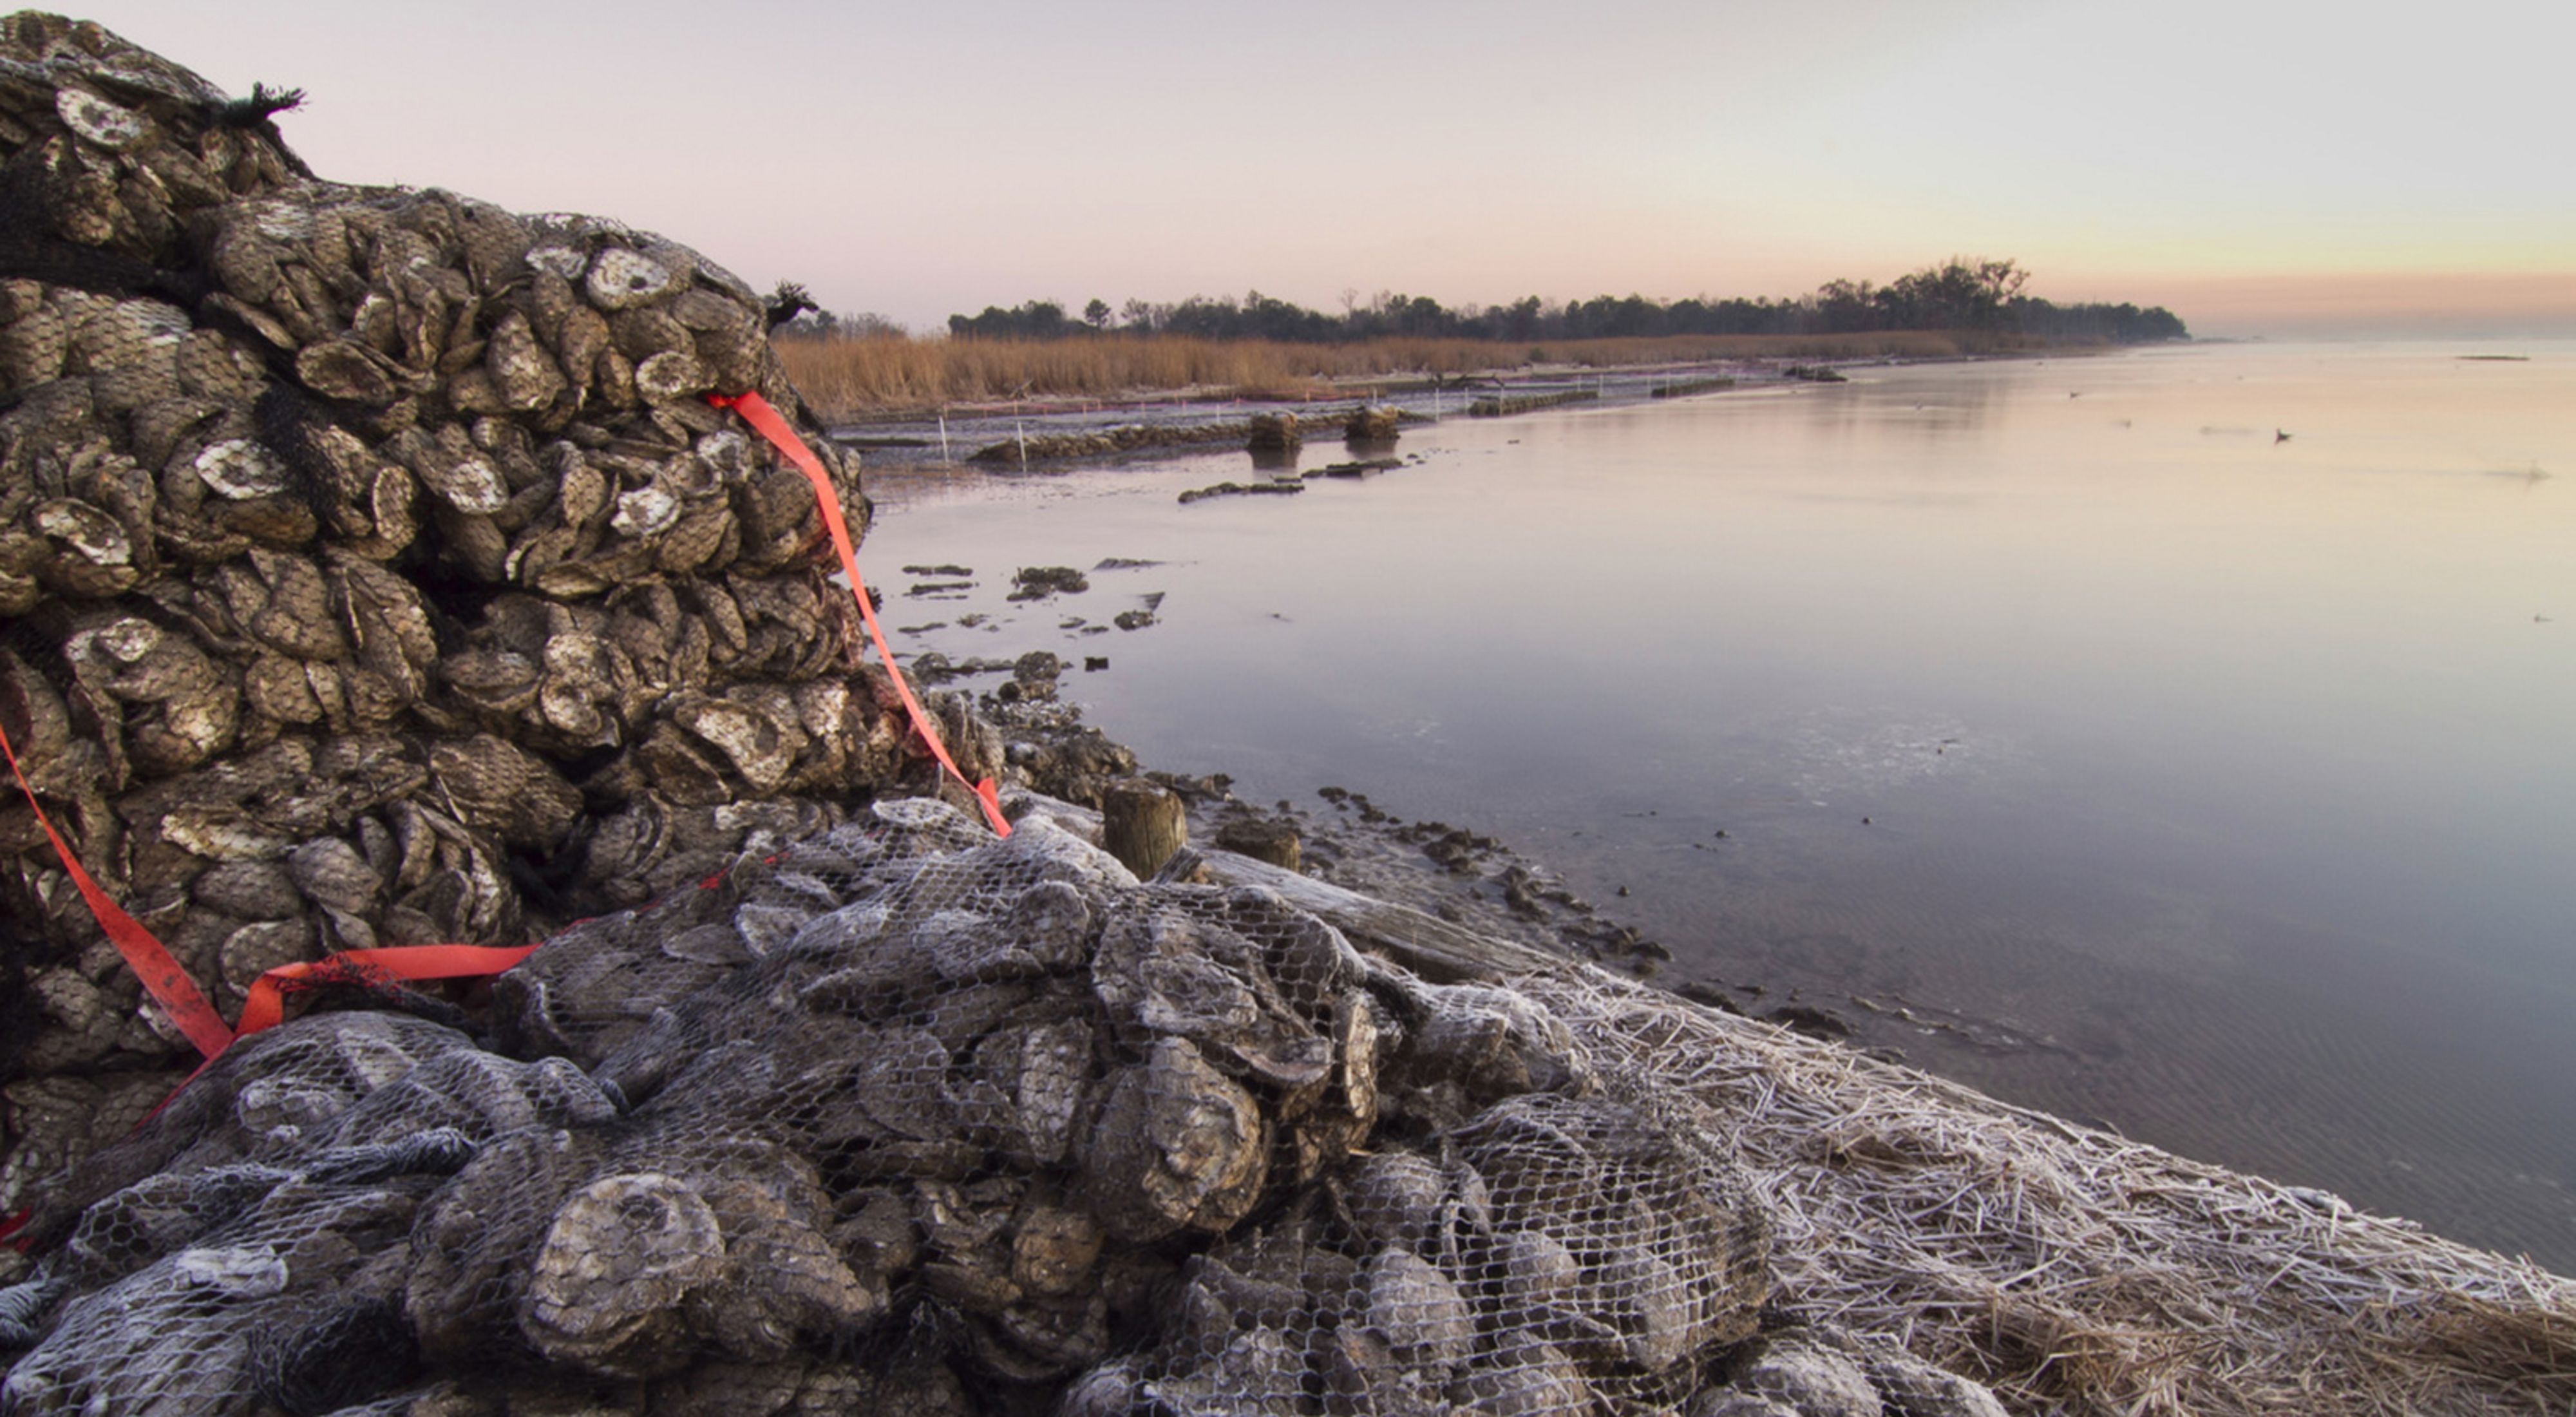 Bags of gray oyster shells are piled up along a coastal area.